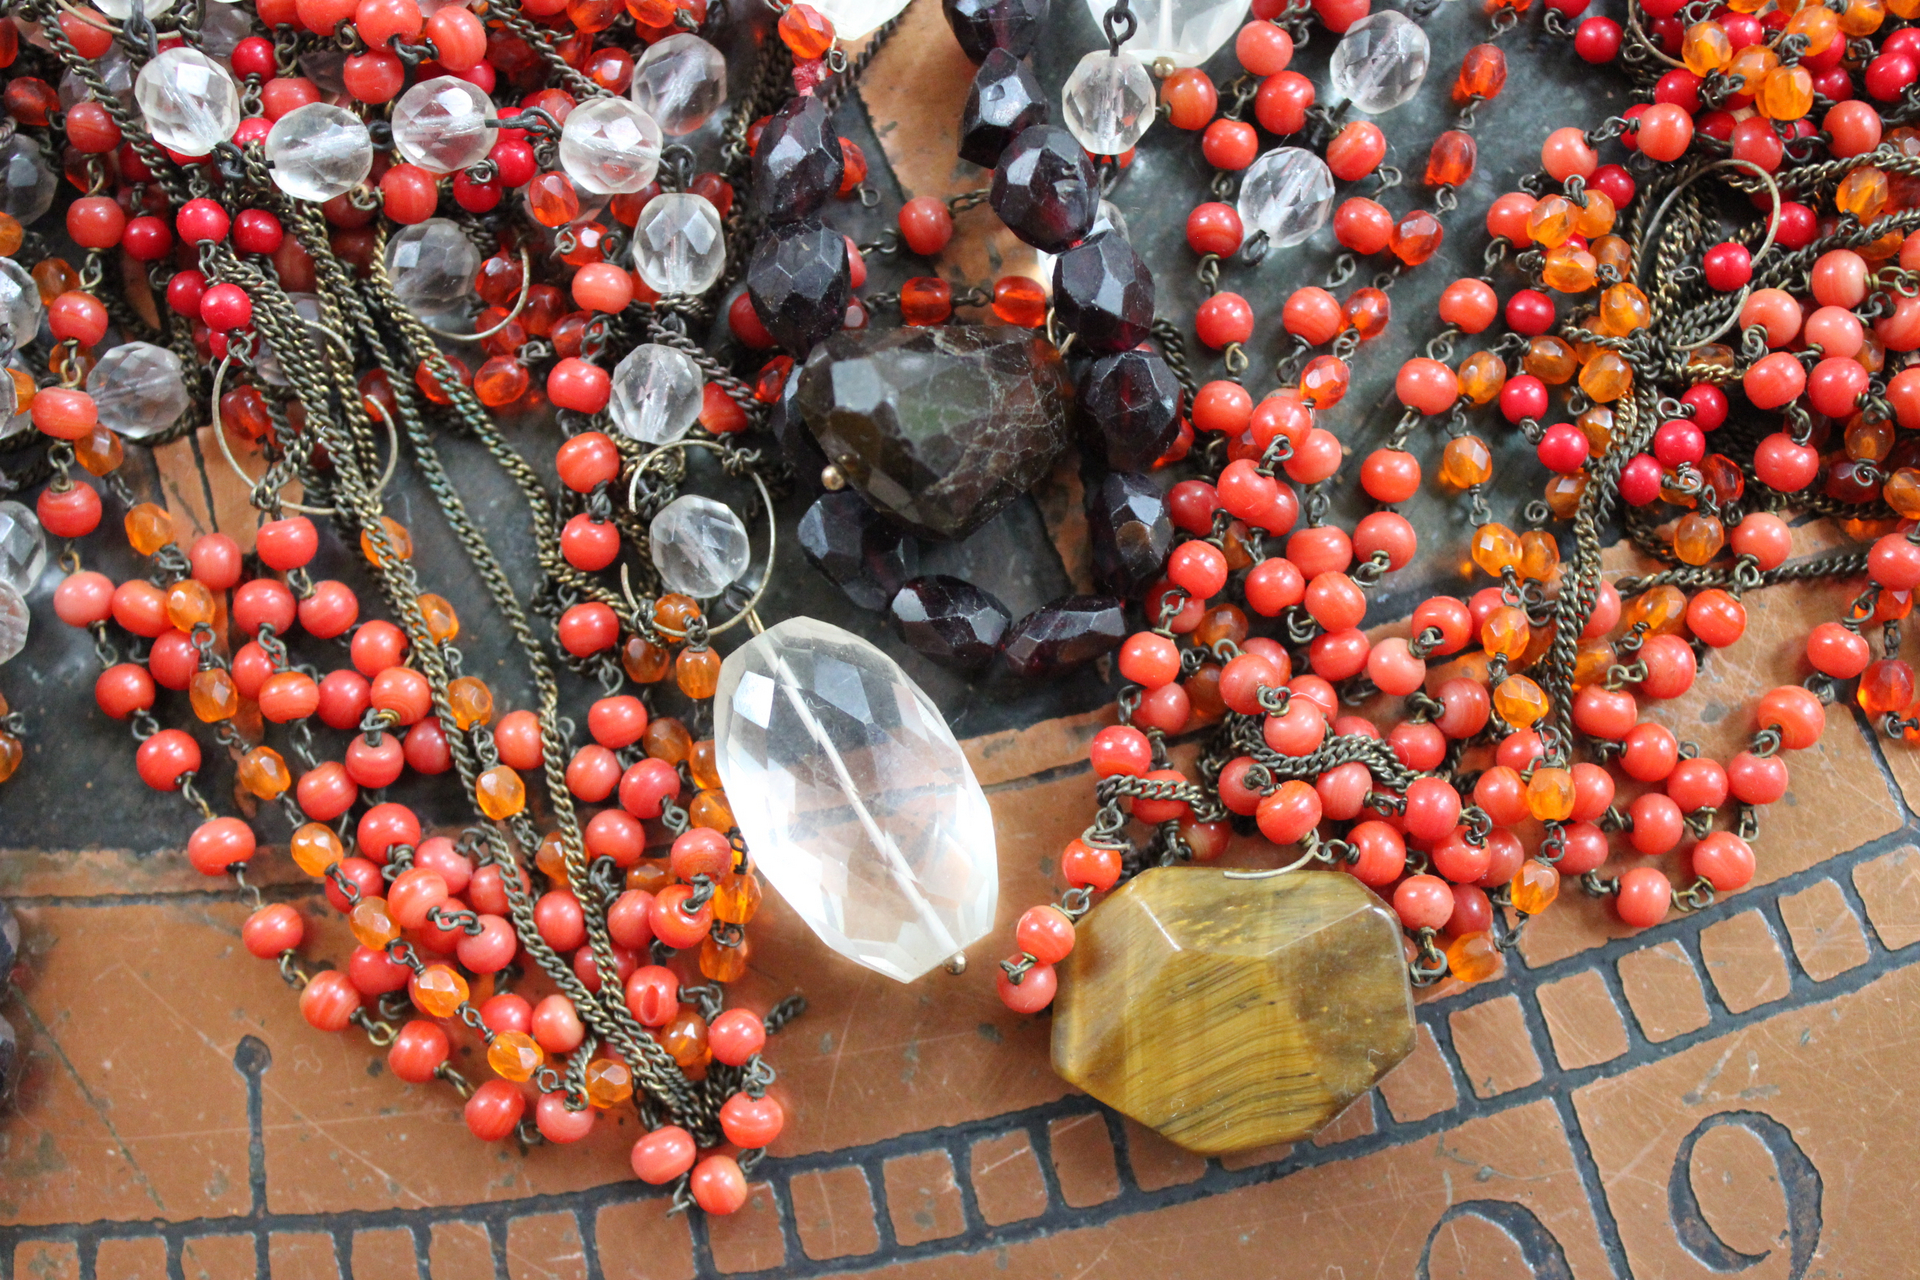 Large Antique Beaded Chain & Faceted Gemstone Lot - perfect for layering necklaces & much more!